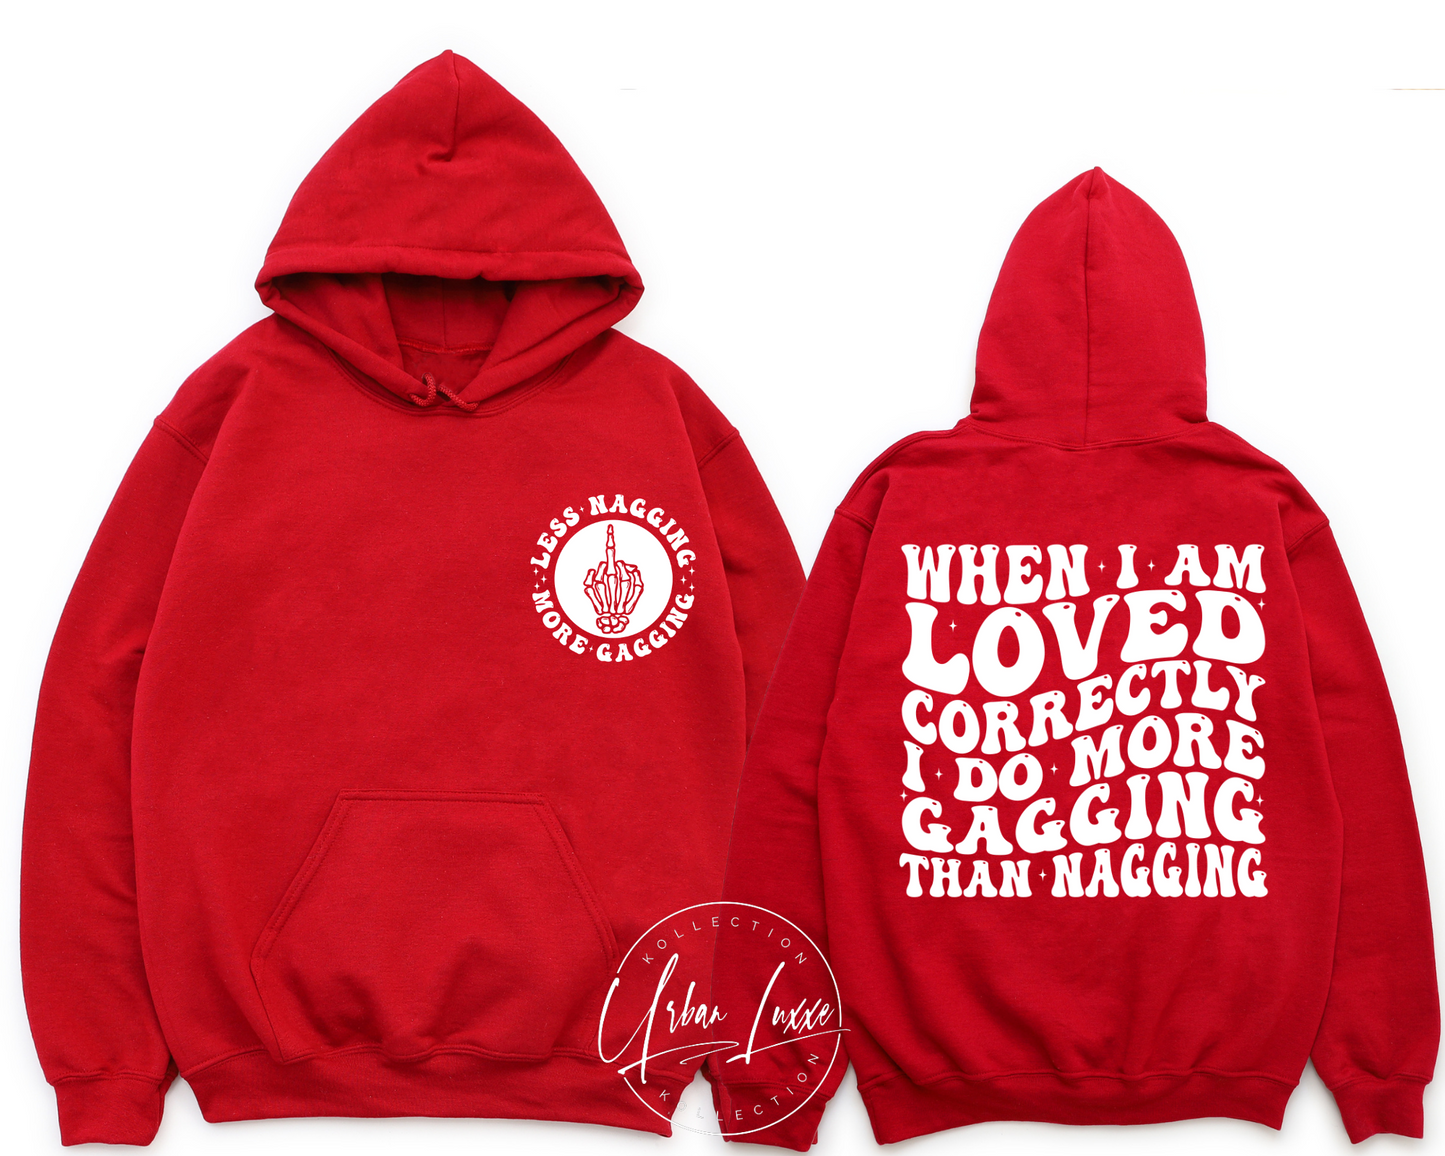 When I’m Loved Correctly I Do More Gagging Than Nagging Hoodie (Front & Back)